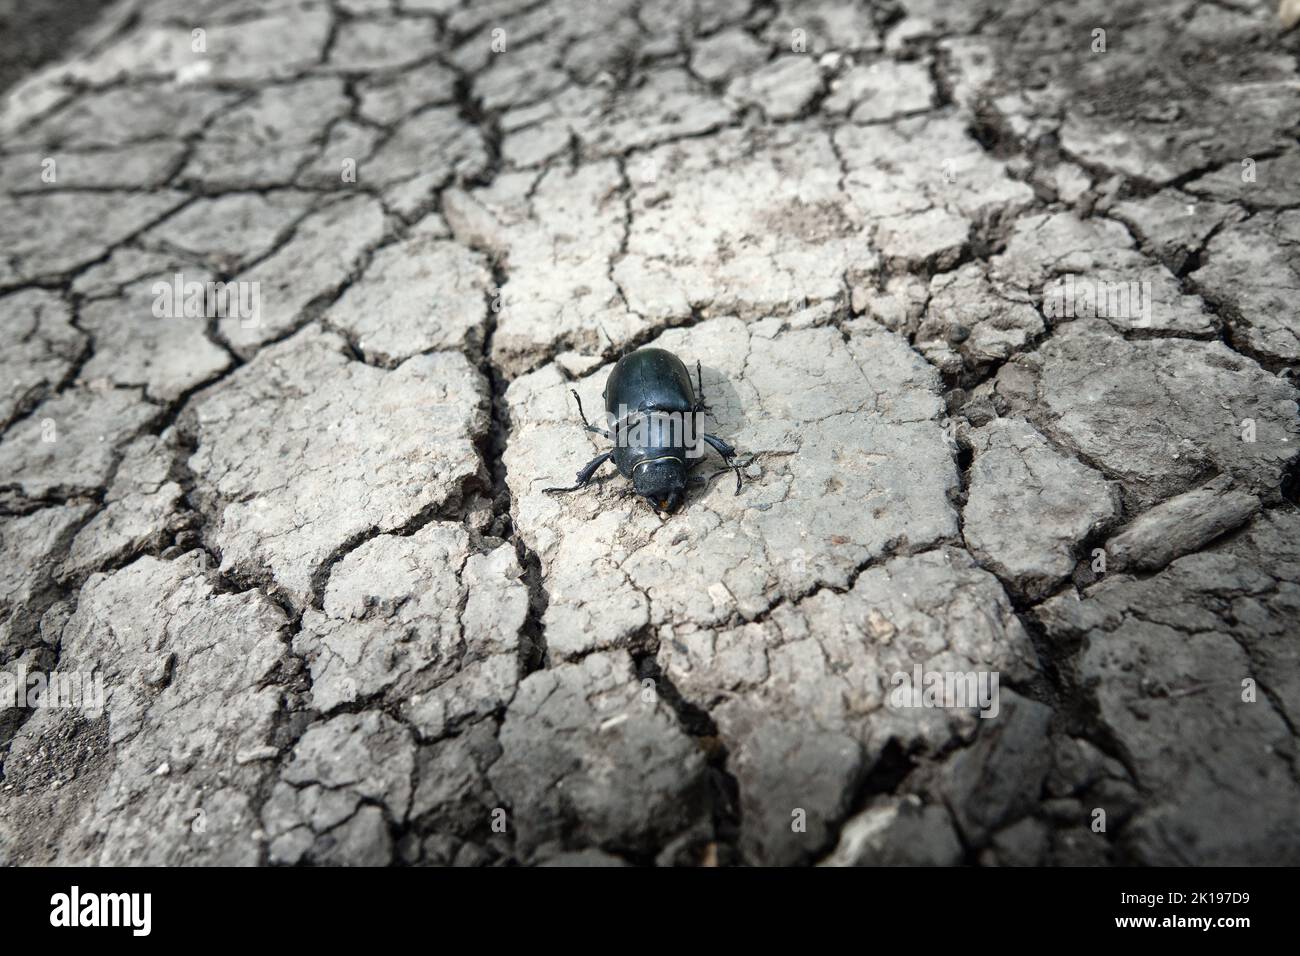 Anhydrous dry cracked earth and a dead black bug. The concept of drought and animal extinction in modern disturbed nature Stock Photo